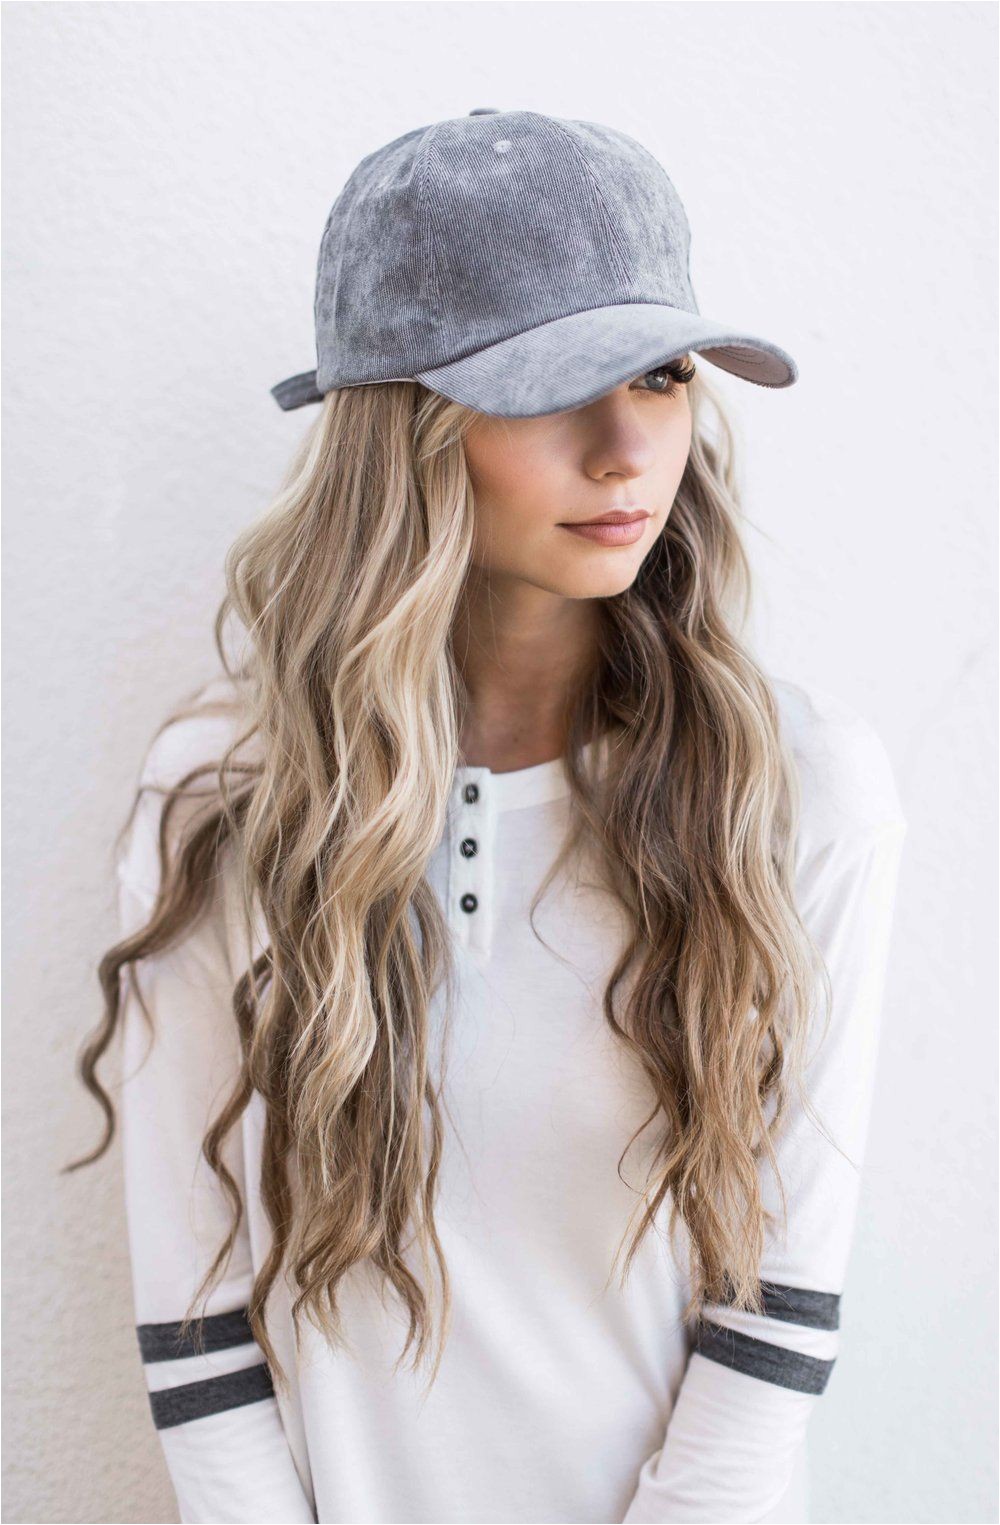 Snapback Hairstyles for Girls Can someone Tell Me How to This Hair Style